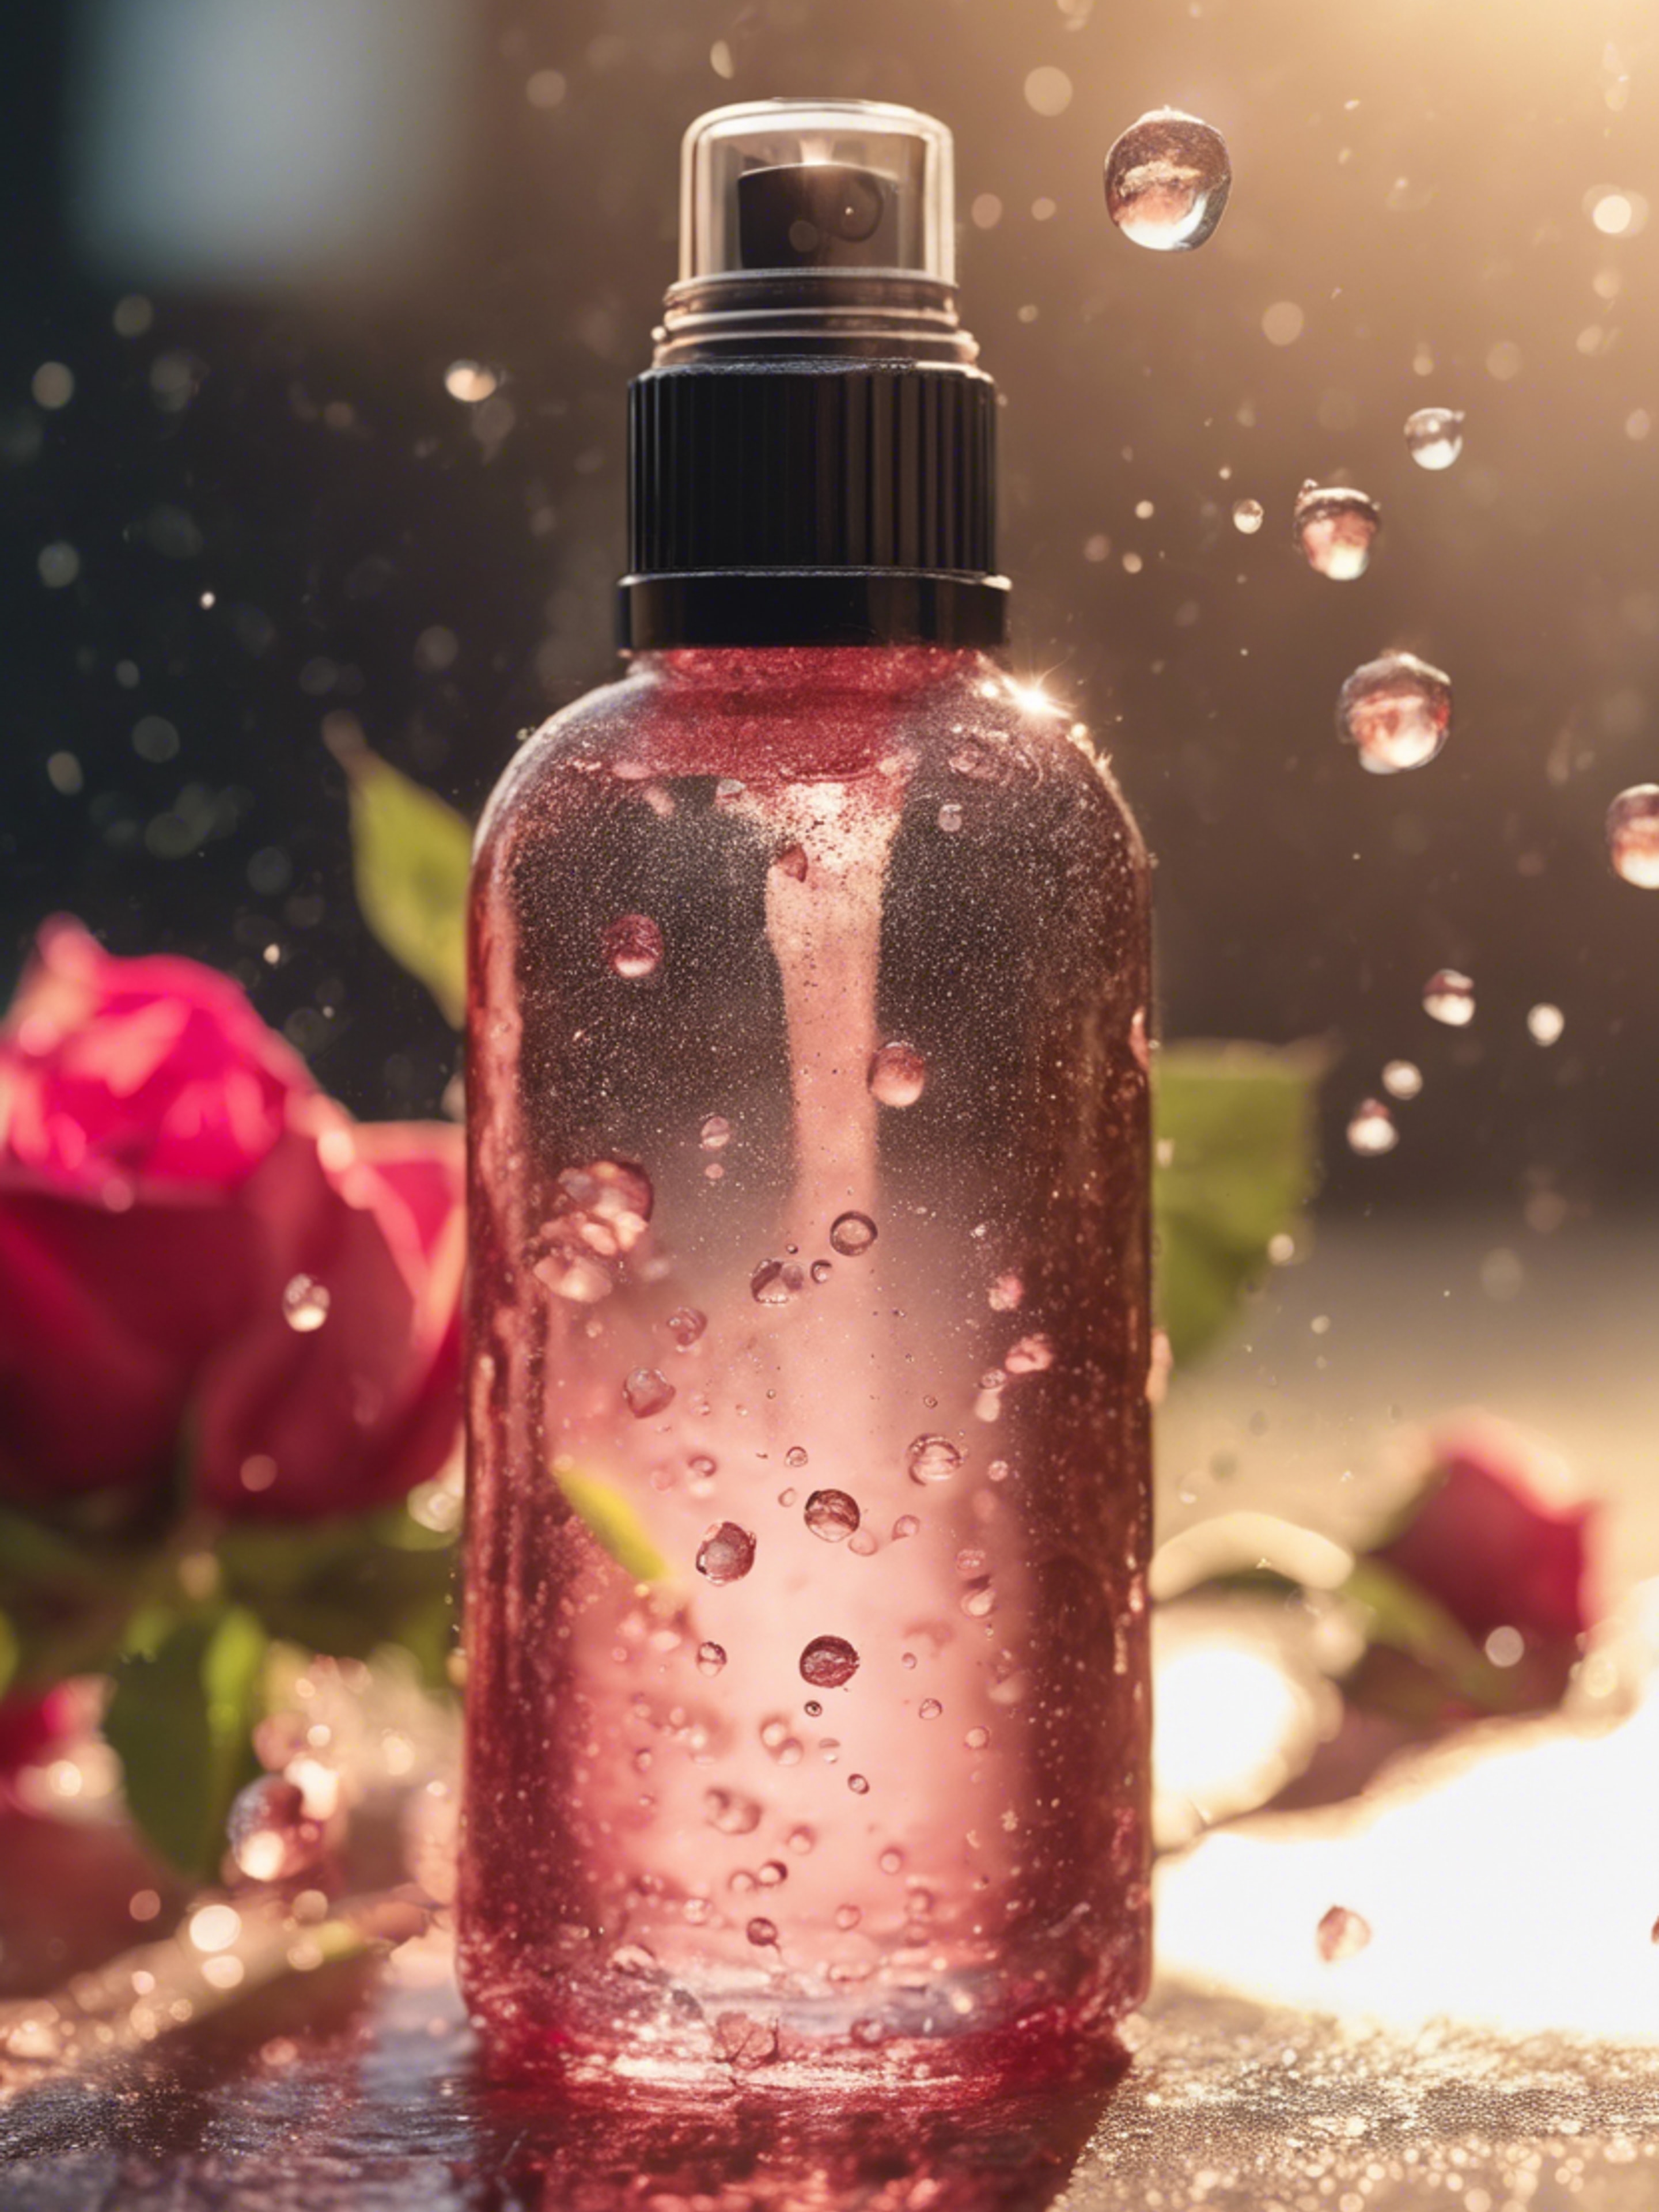 A refreshing spray bottle of rose water toner sprinkling droplets in the sunlight. Tapet[f1b2cb92d7c7439692a8]